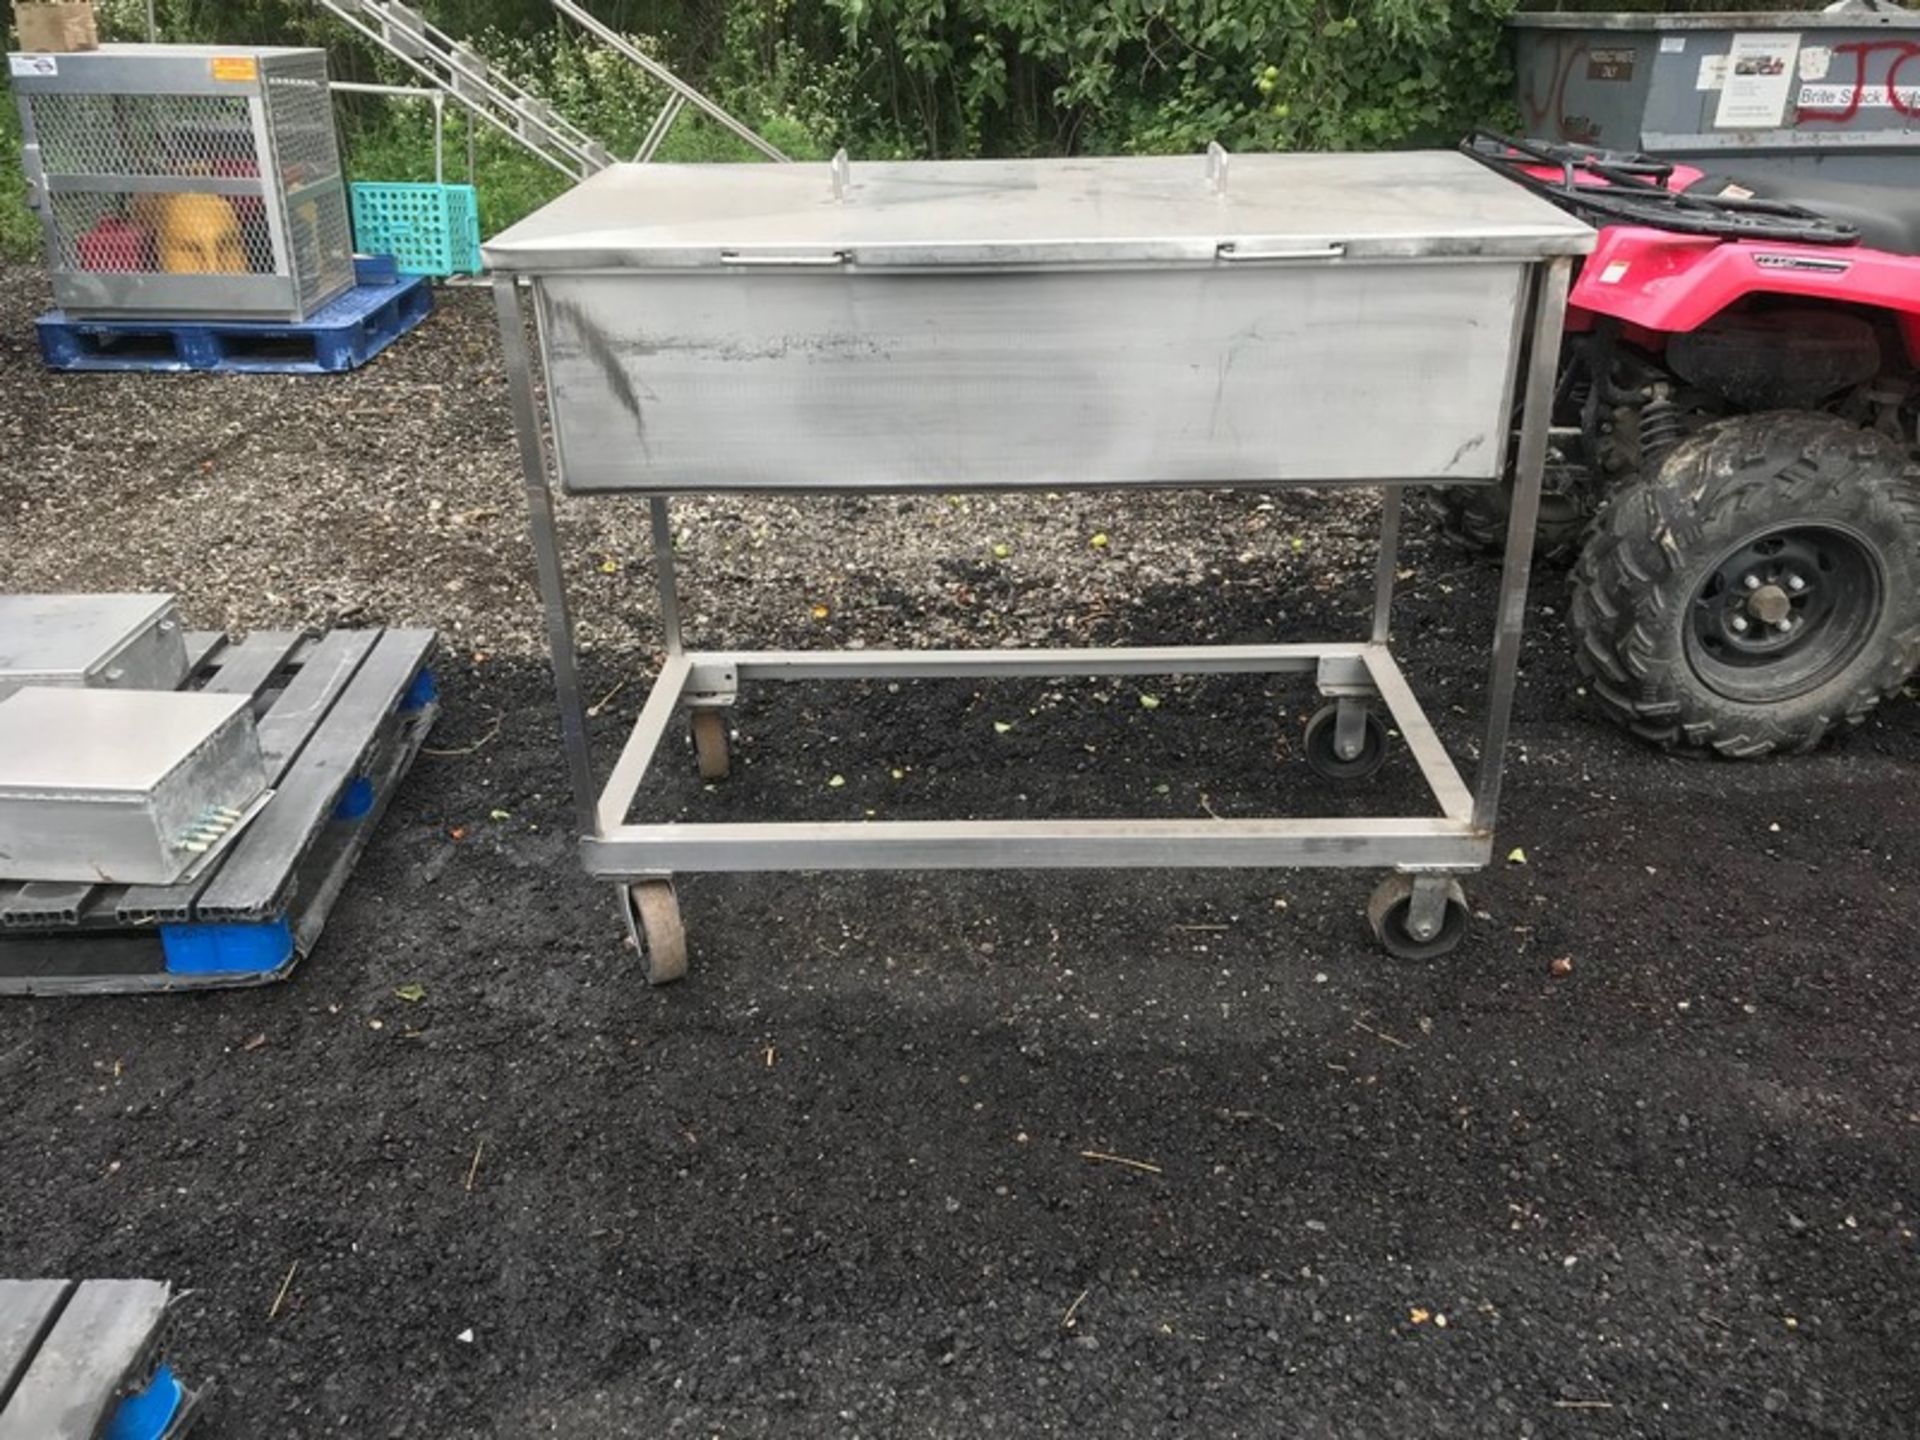 Stainless Steel Drain Table 24 x 48 inch (Located Union Grove, WI) (Loading/Rigging Fee $75) - Image 2 of 2